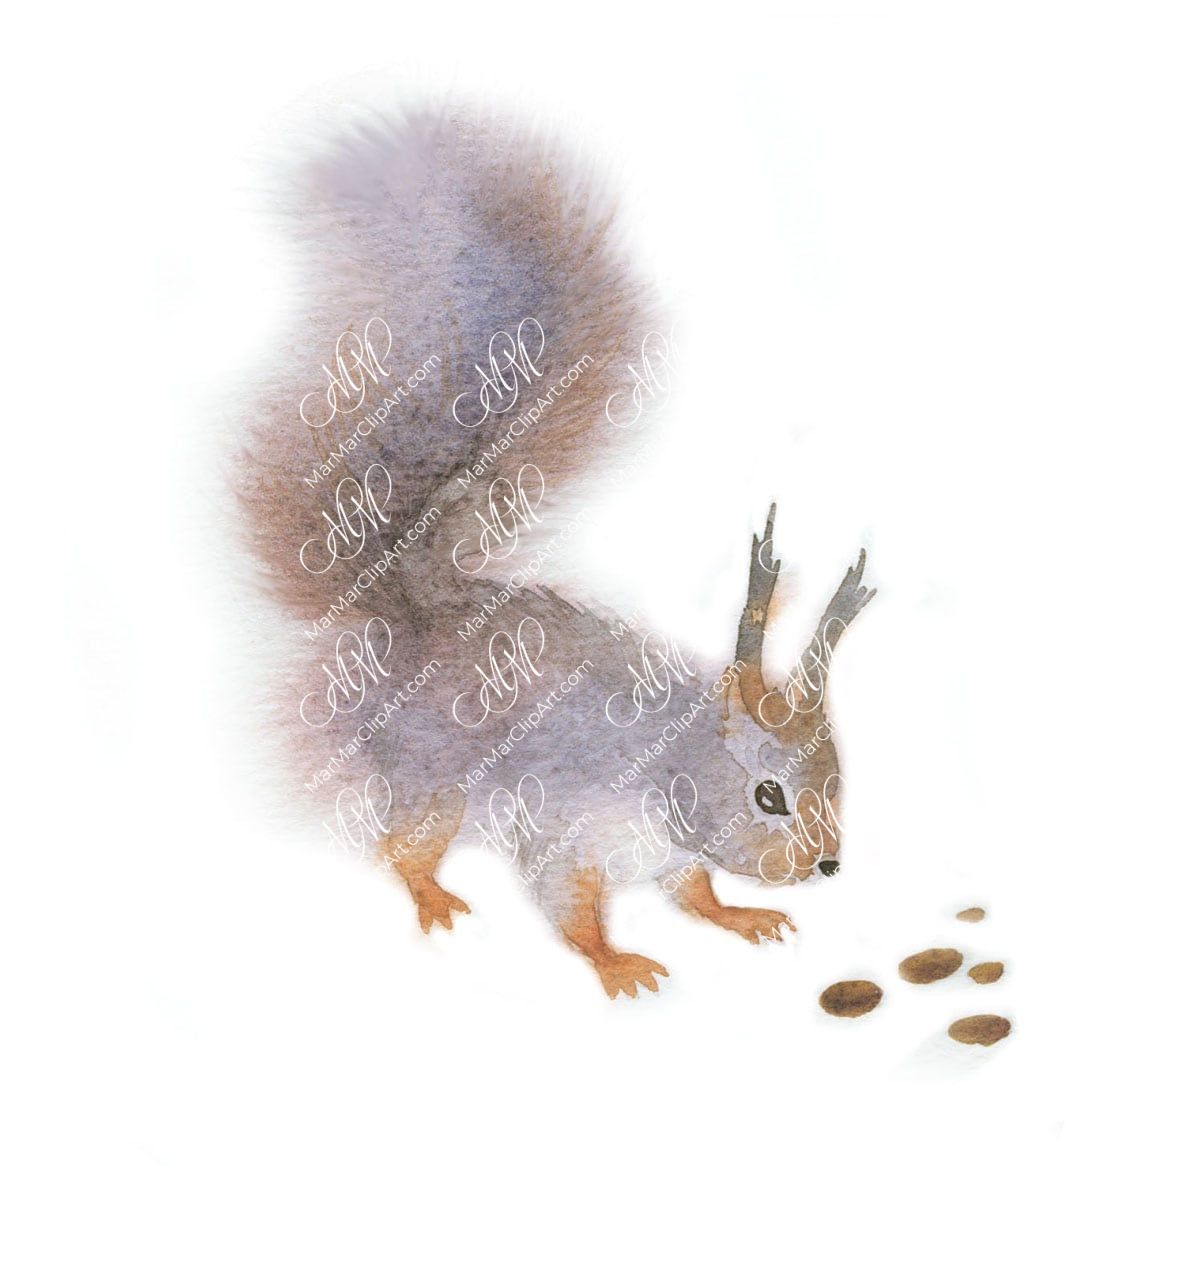 Winter picture: fluffy gray squirrel found pine nuts. Watercolor illustration